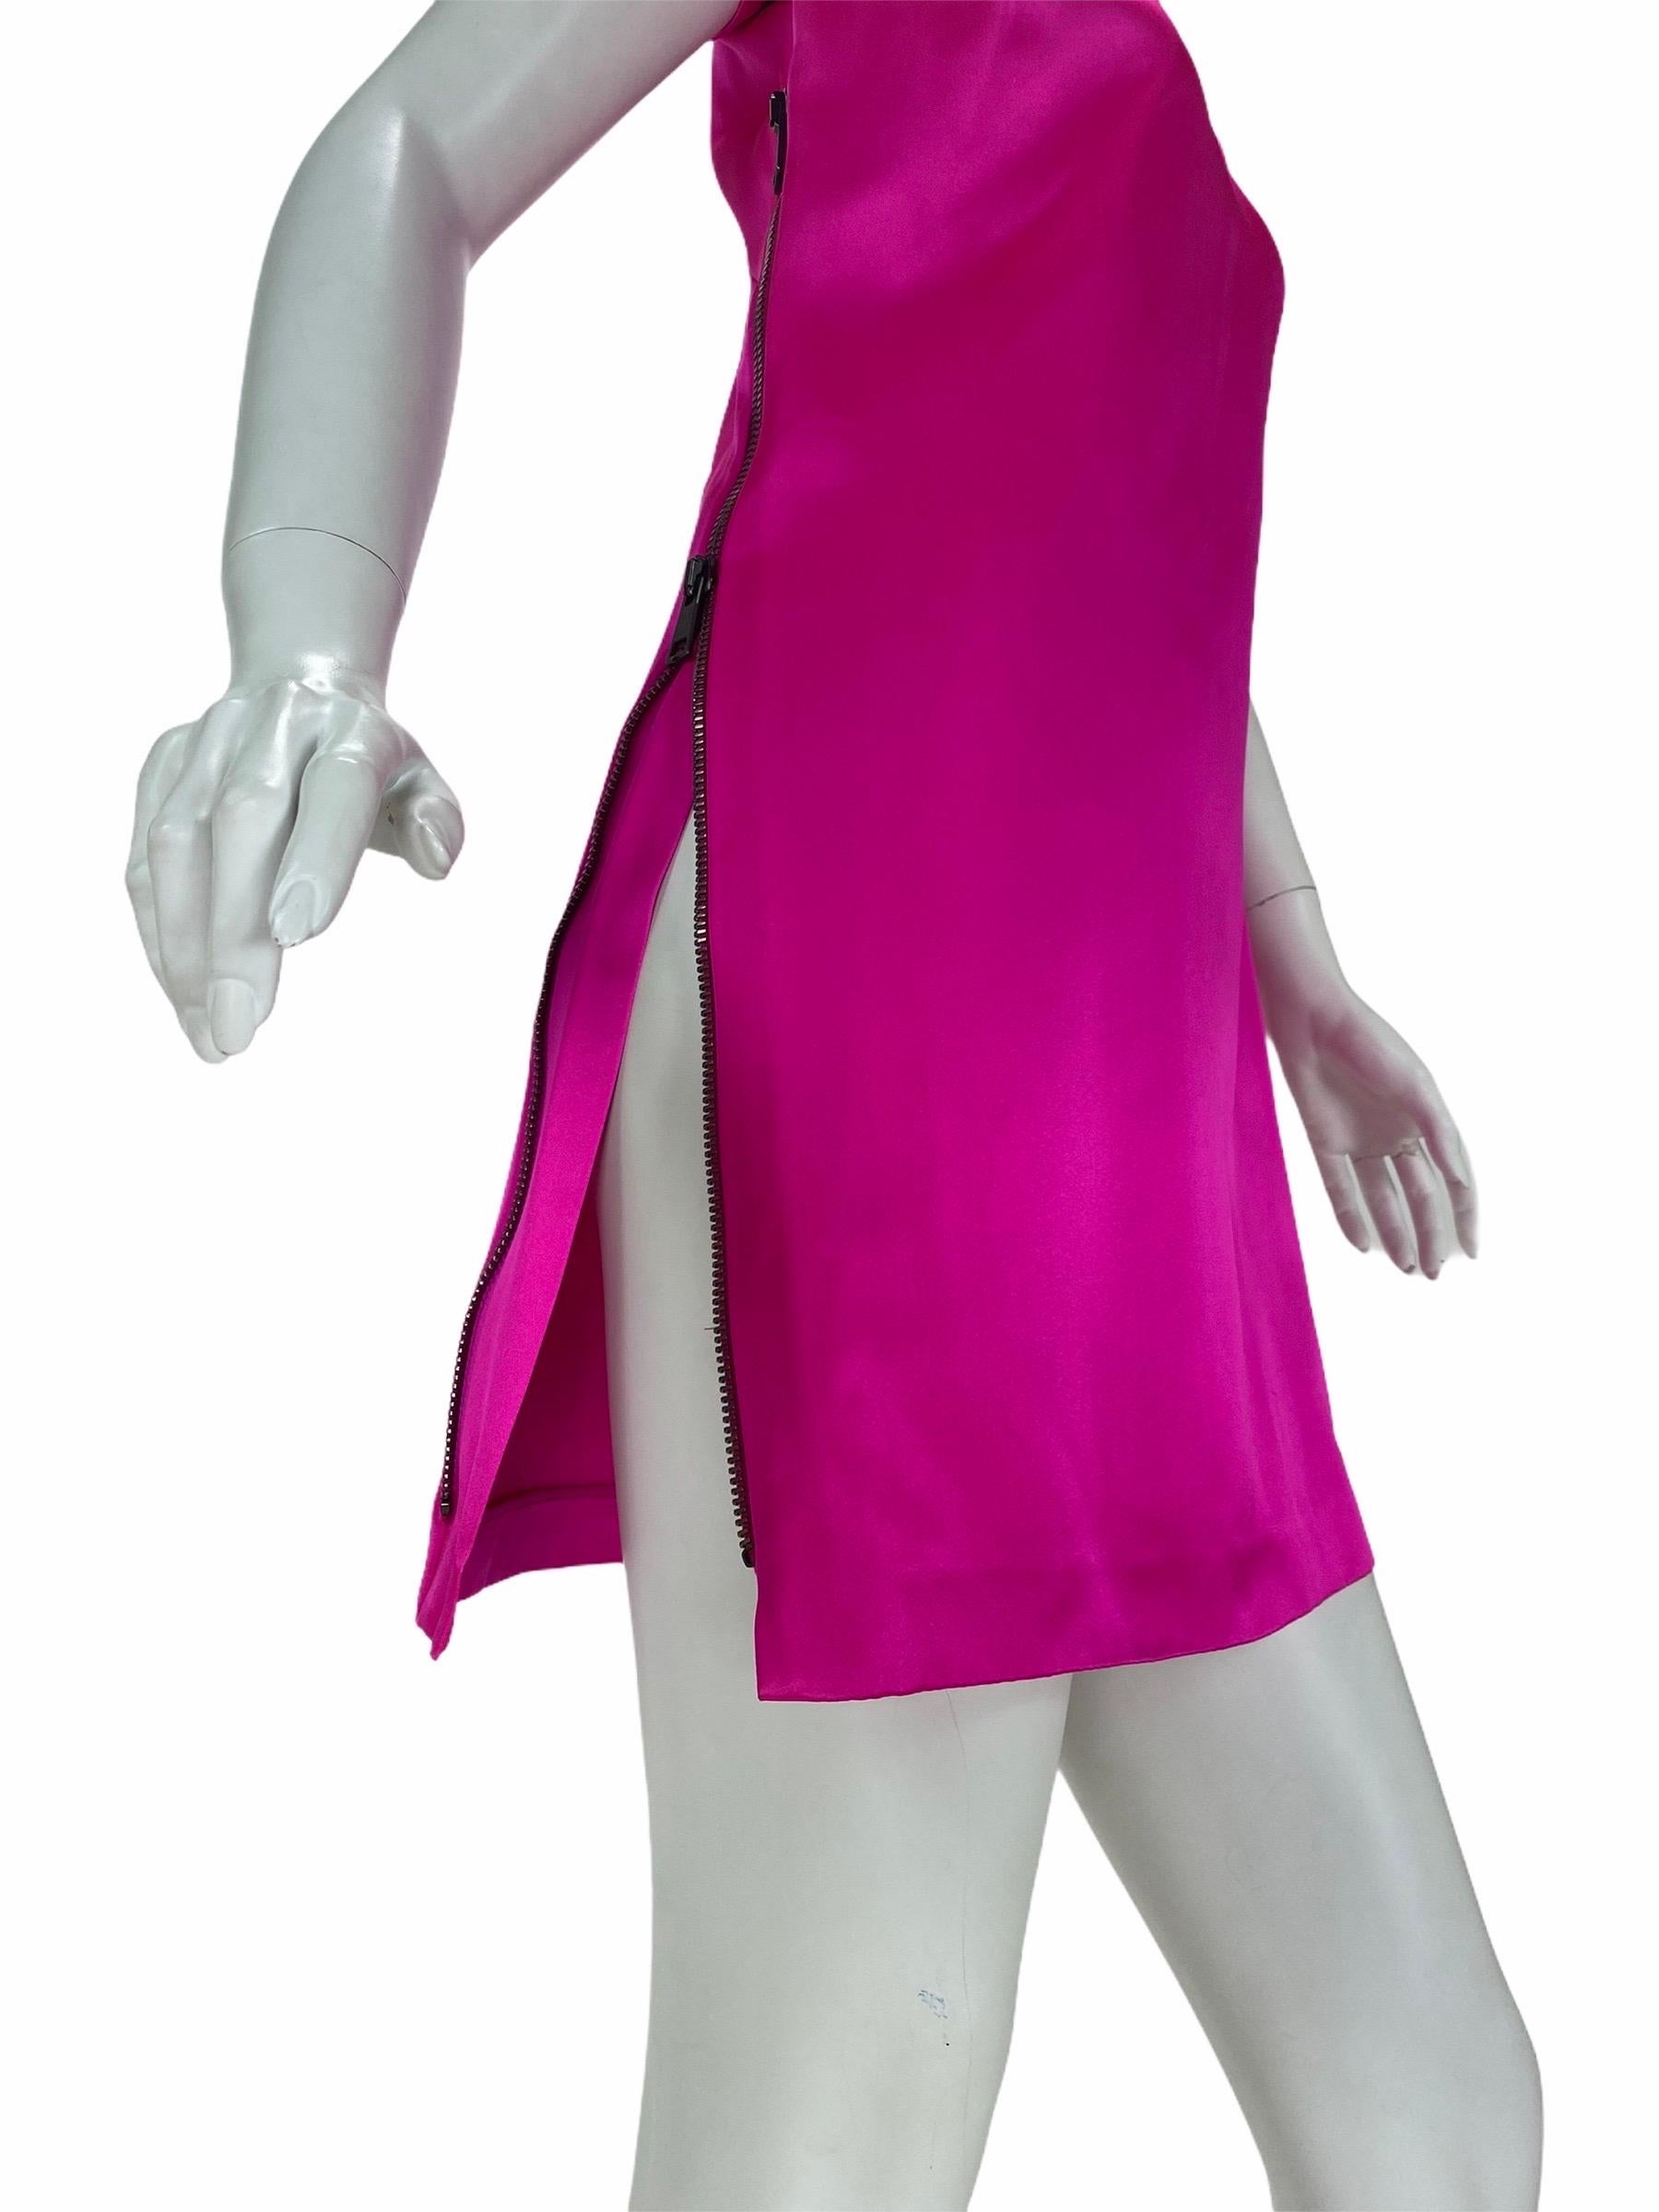 F/W 2001 Tom Ford for Gucci Hot Pink Dress with Exposed Zipper
Featured on runway and ad campaign
IT Size 40 - US 4
Made in Italy
Excellent condition